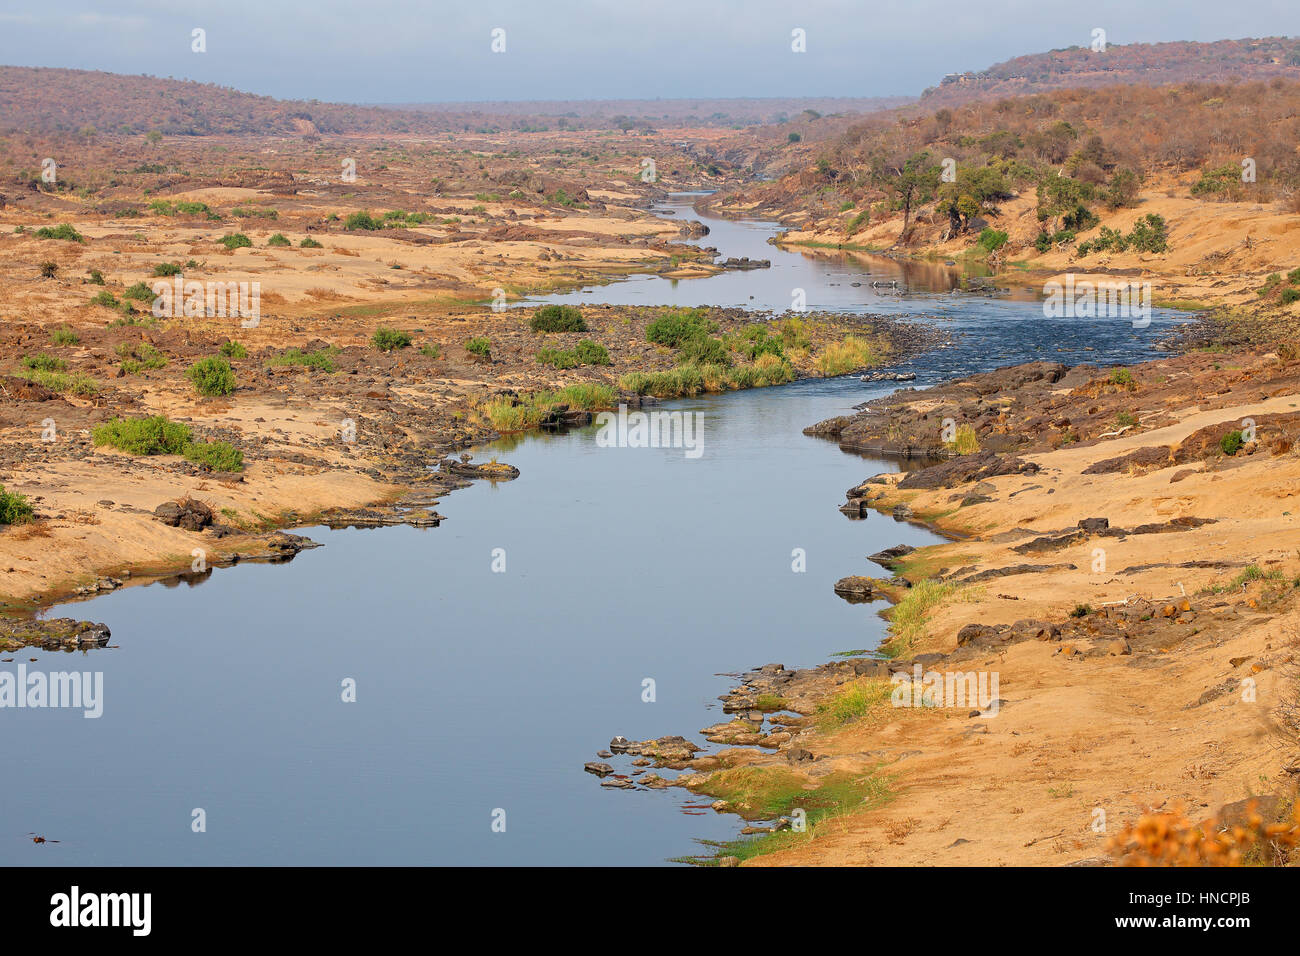 Landscape view of the olifants river, Kruger National Park, South Africa Stock Photo